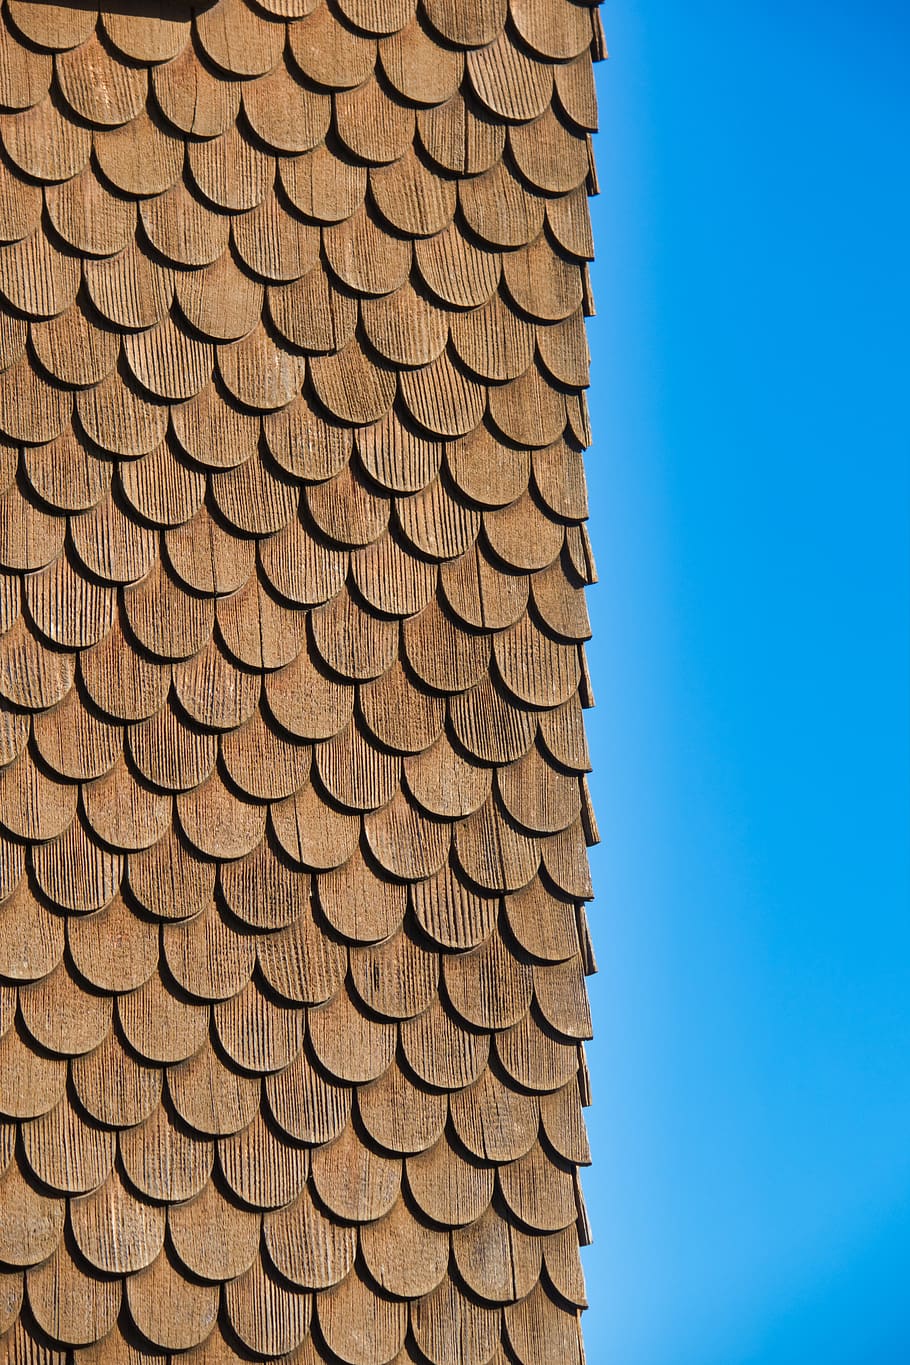 wood shingles, shingle, facade, facade cladding, sky, blue, pattern, day, clear sky, large group of objects